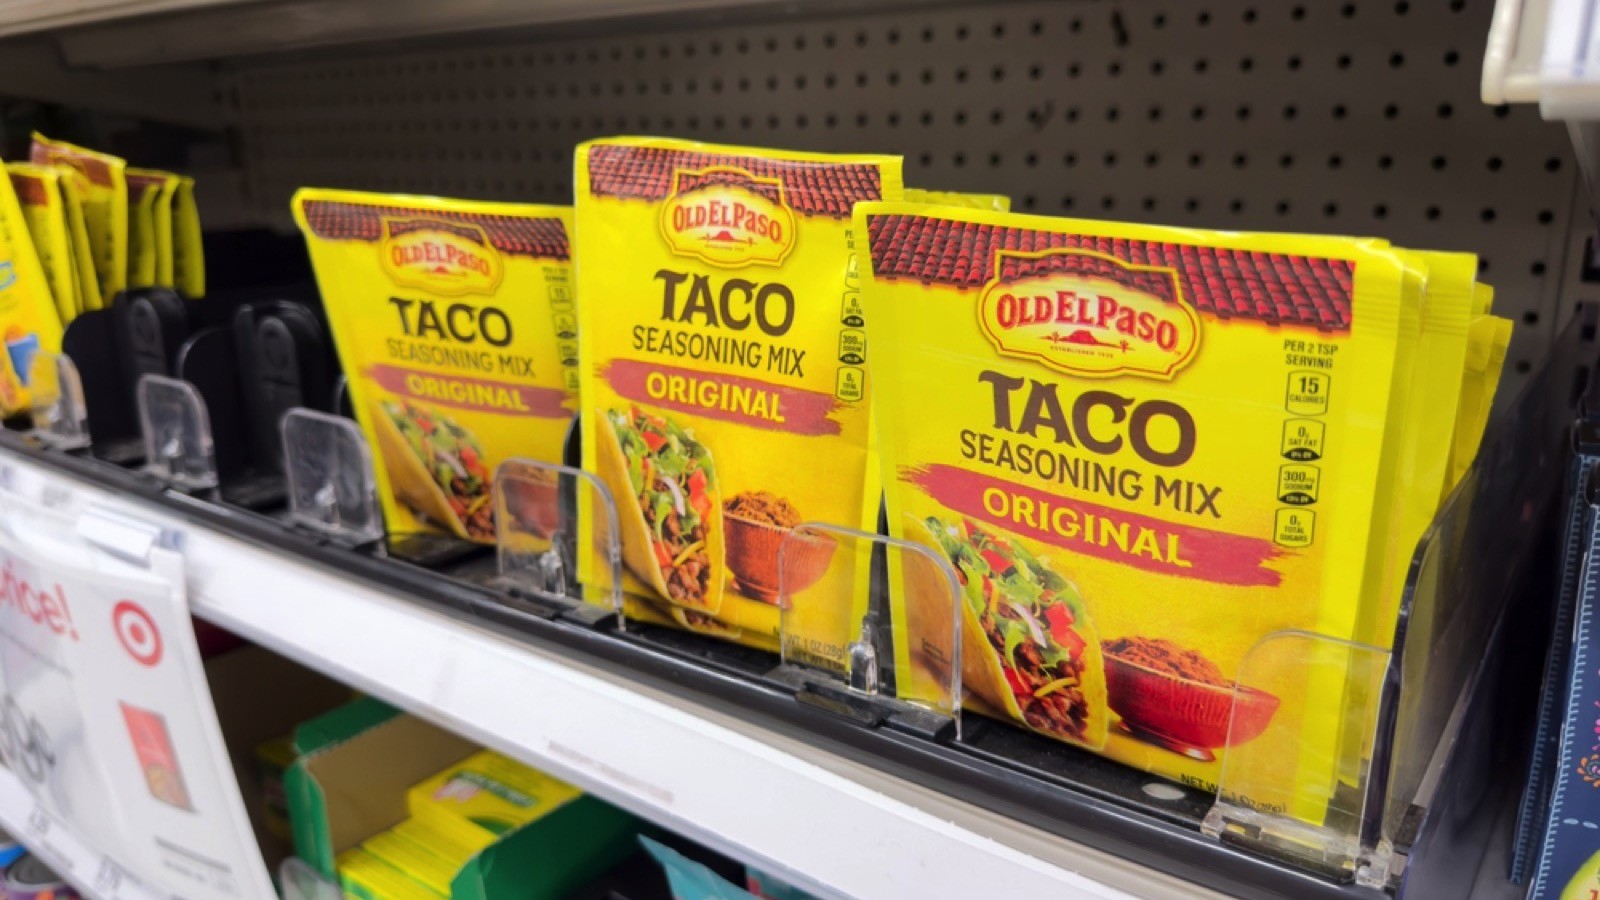 Los Angeles, California, United States - 02-01-2023: A view of several packets of Old El Paso taco seasoning, on display at a local grocery store.